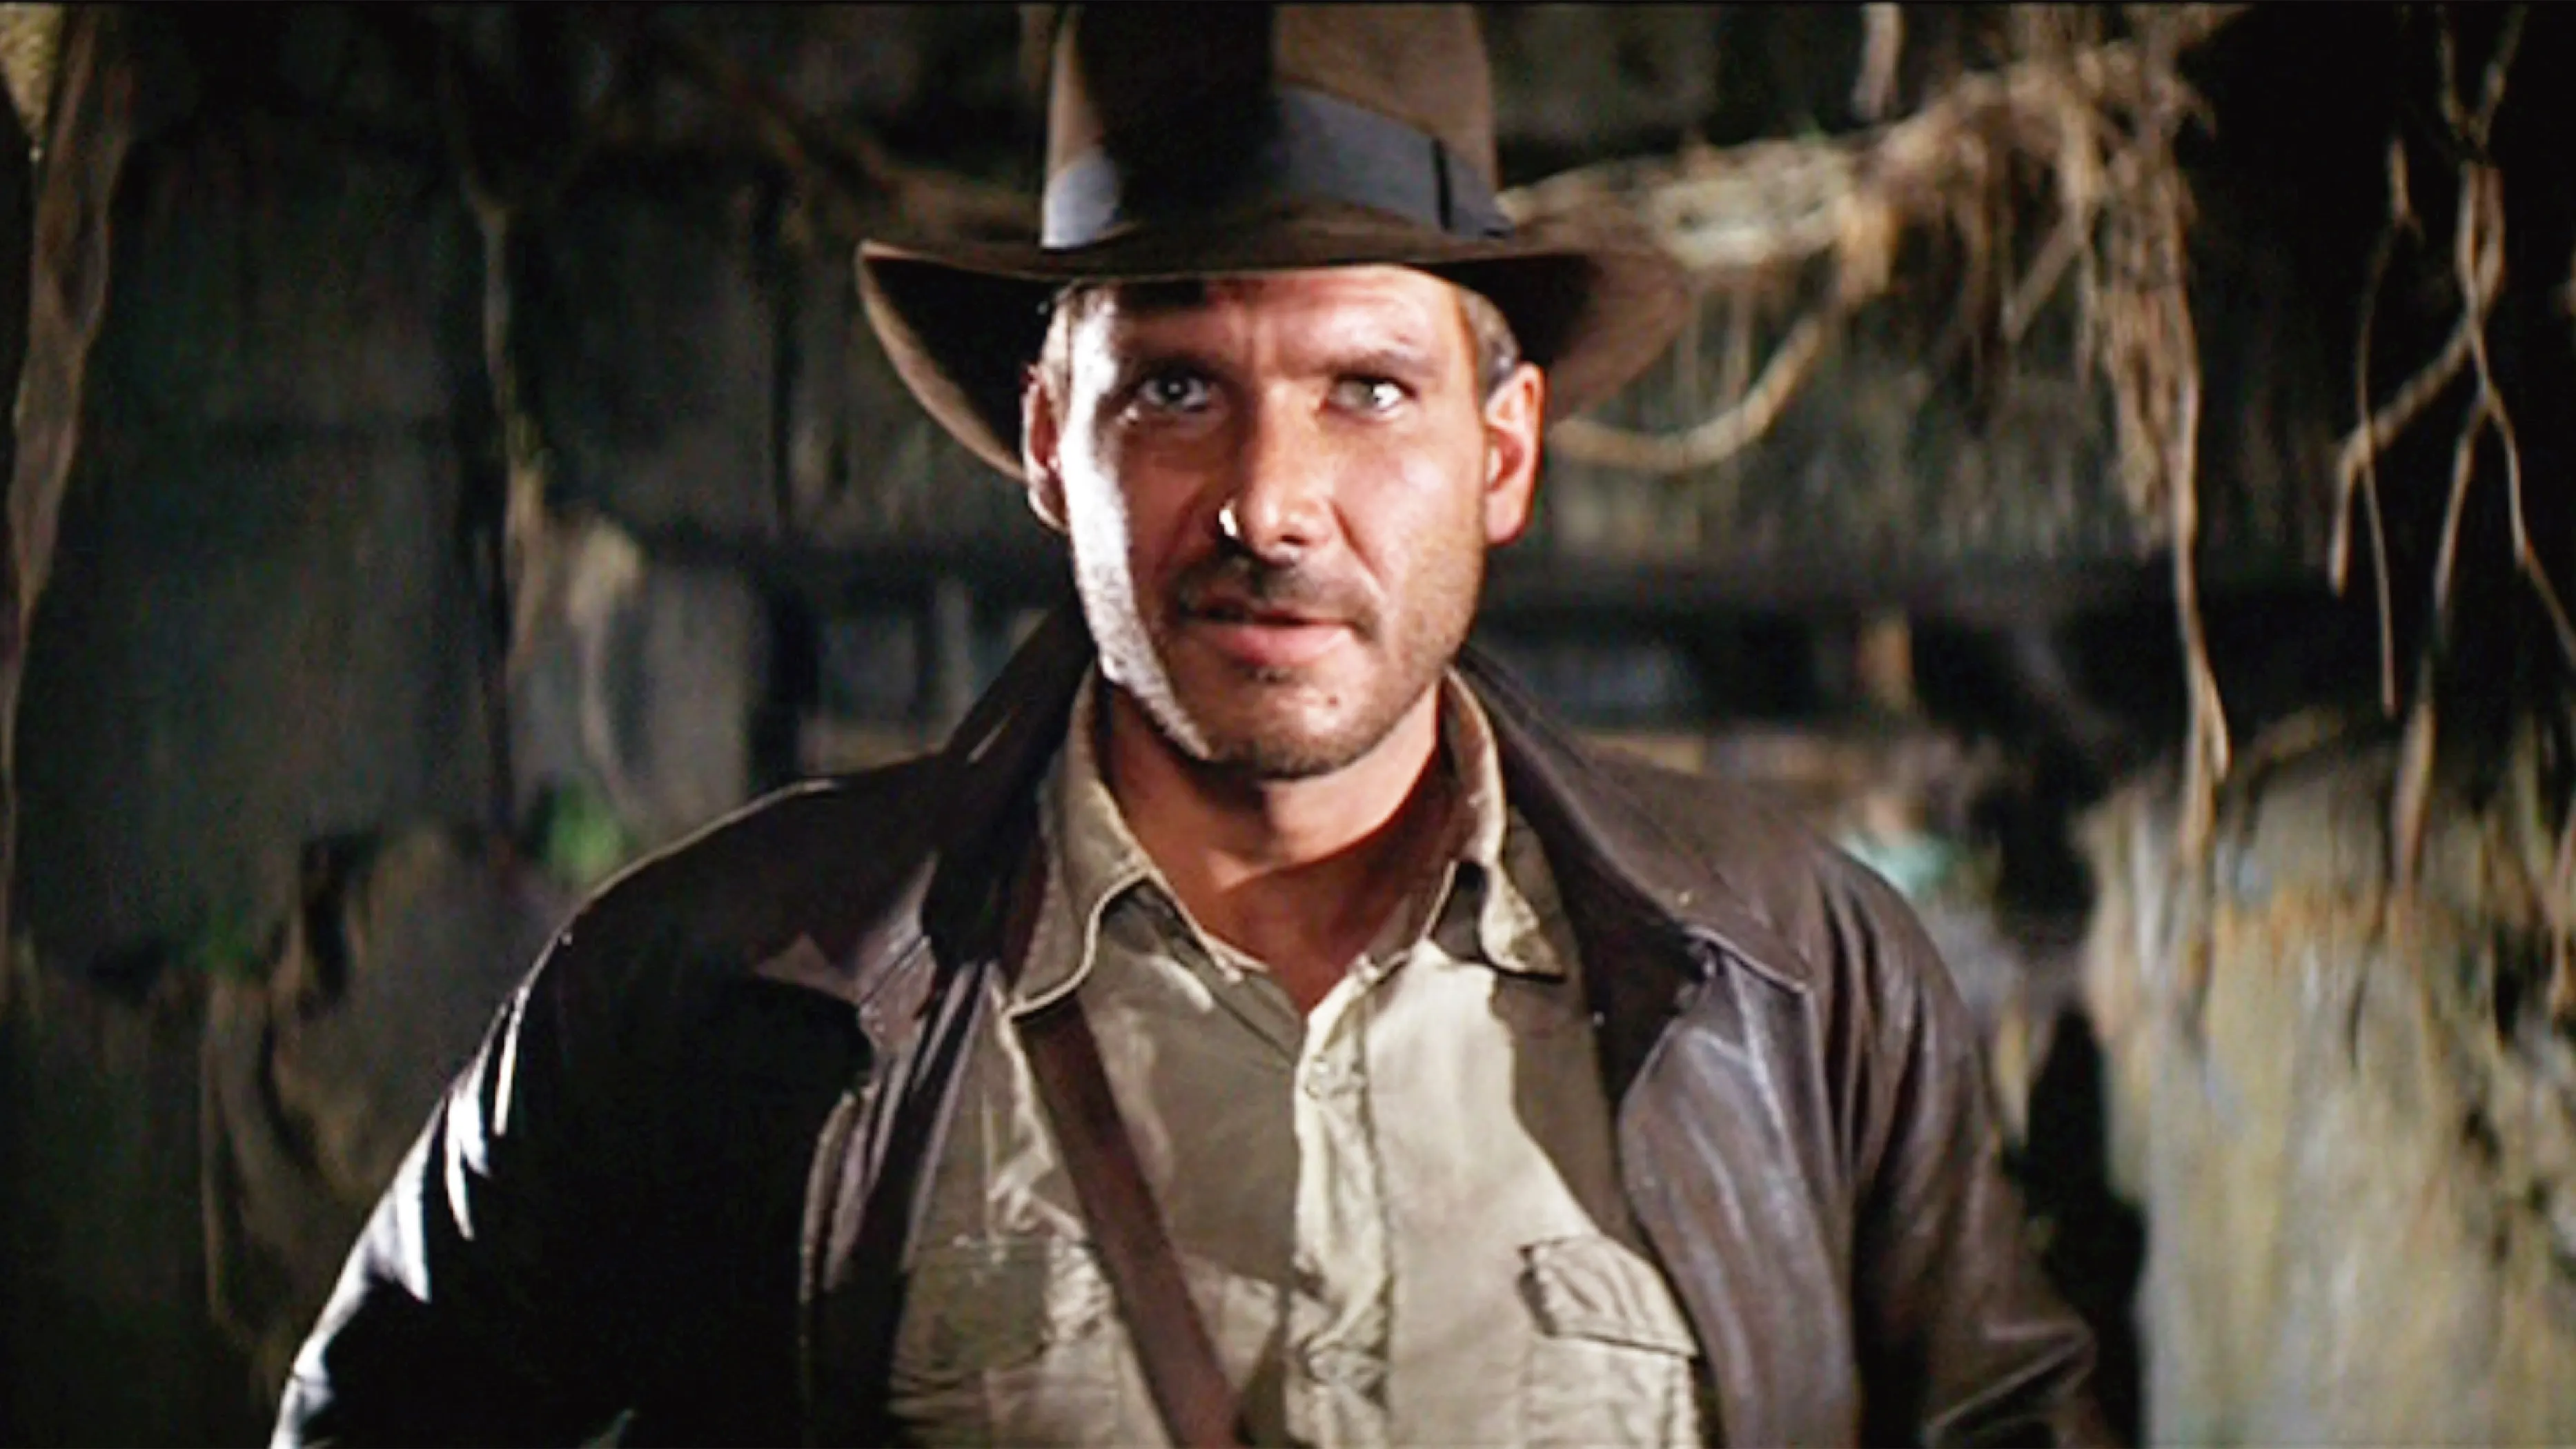 ‘Indiana Jones’ star Harrison Ford pushed back on iconic costume: ‘What am I going to do with a f---ing whip?’